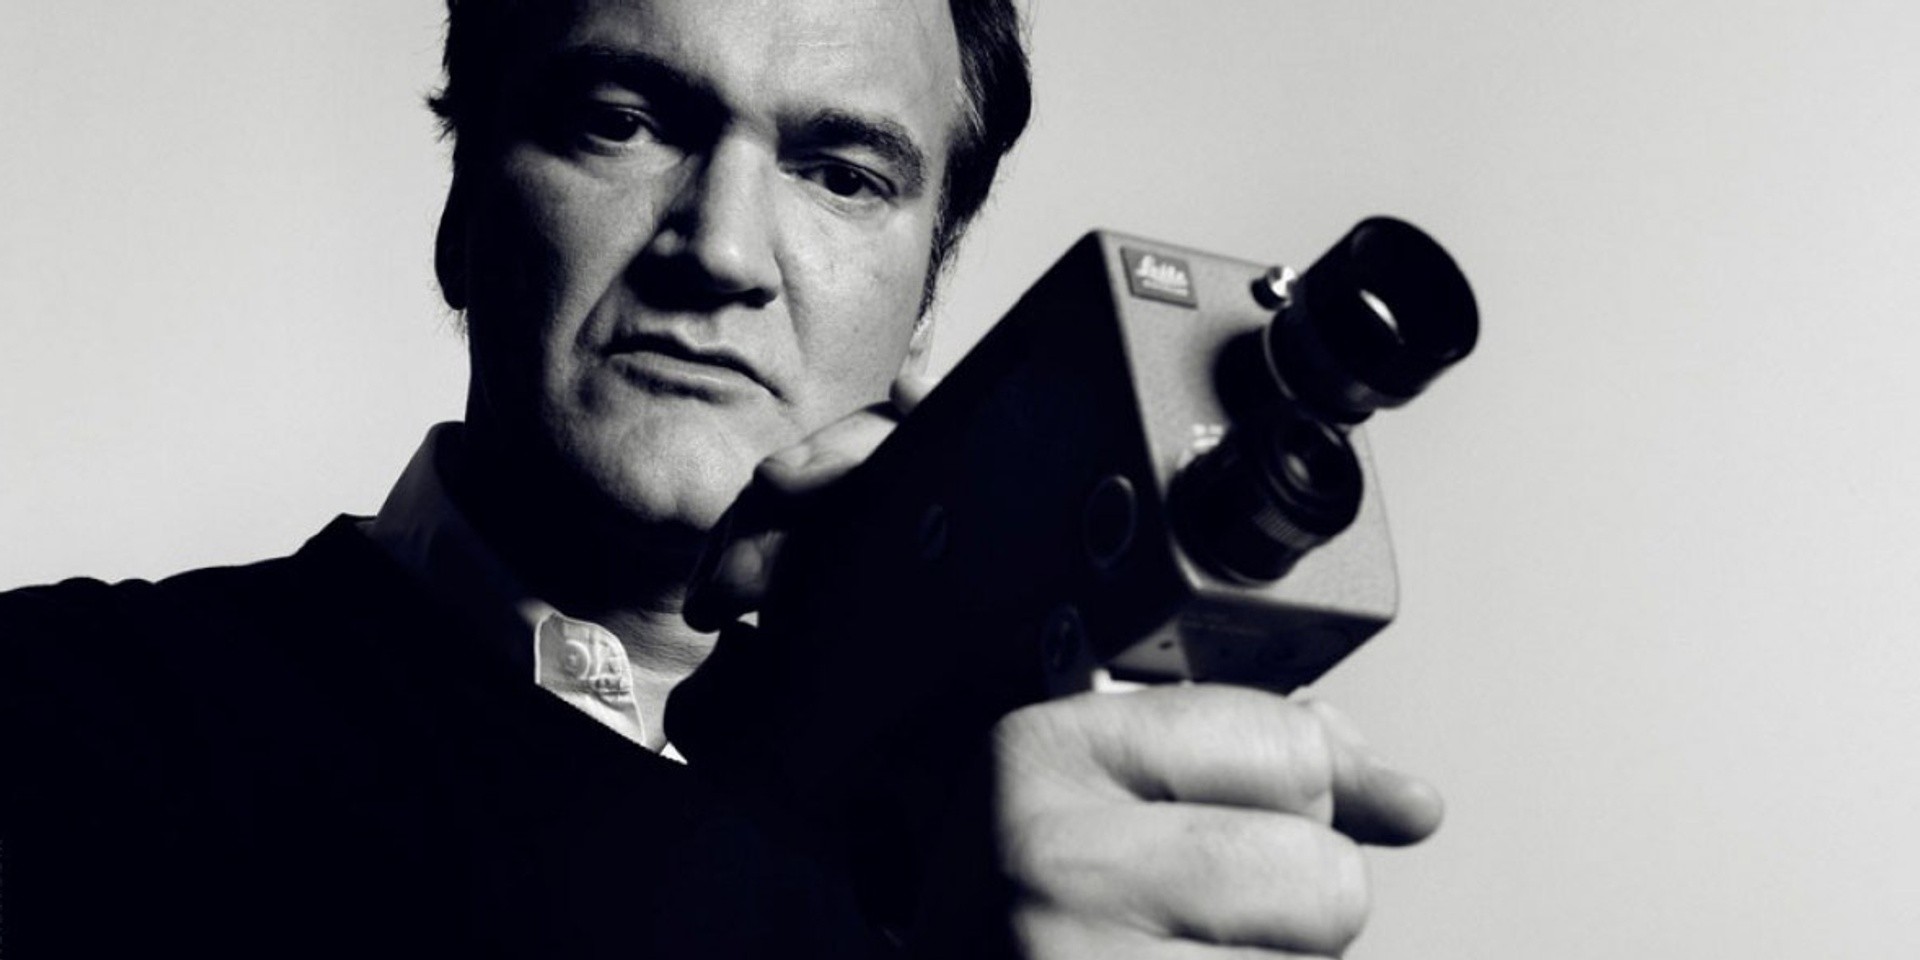 Quentin Tarantino curates Spotify playlist of his favourite songs from his films – listen